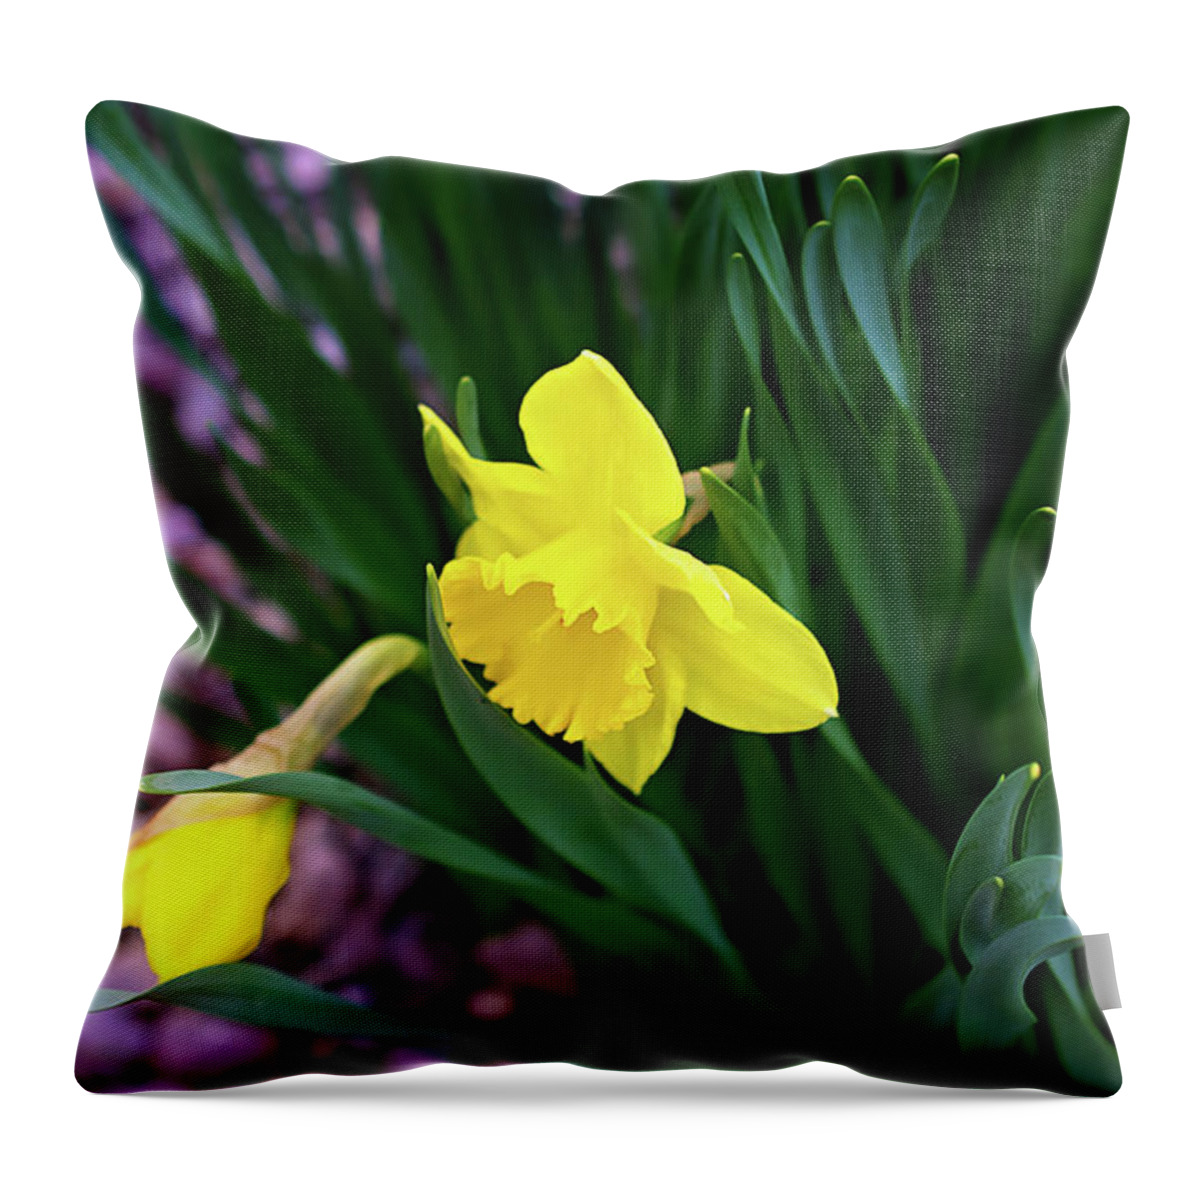 Daffodil Print Throw Pillow featuring the photograph Daffodil Print by Gwen Gibson